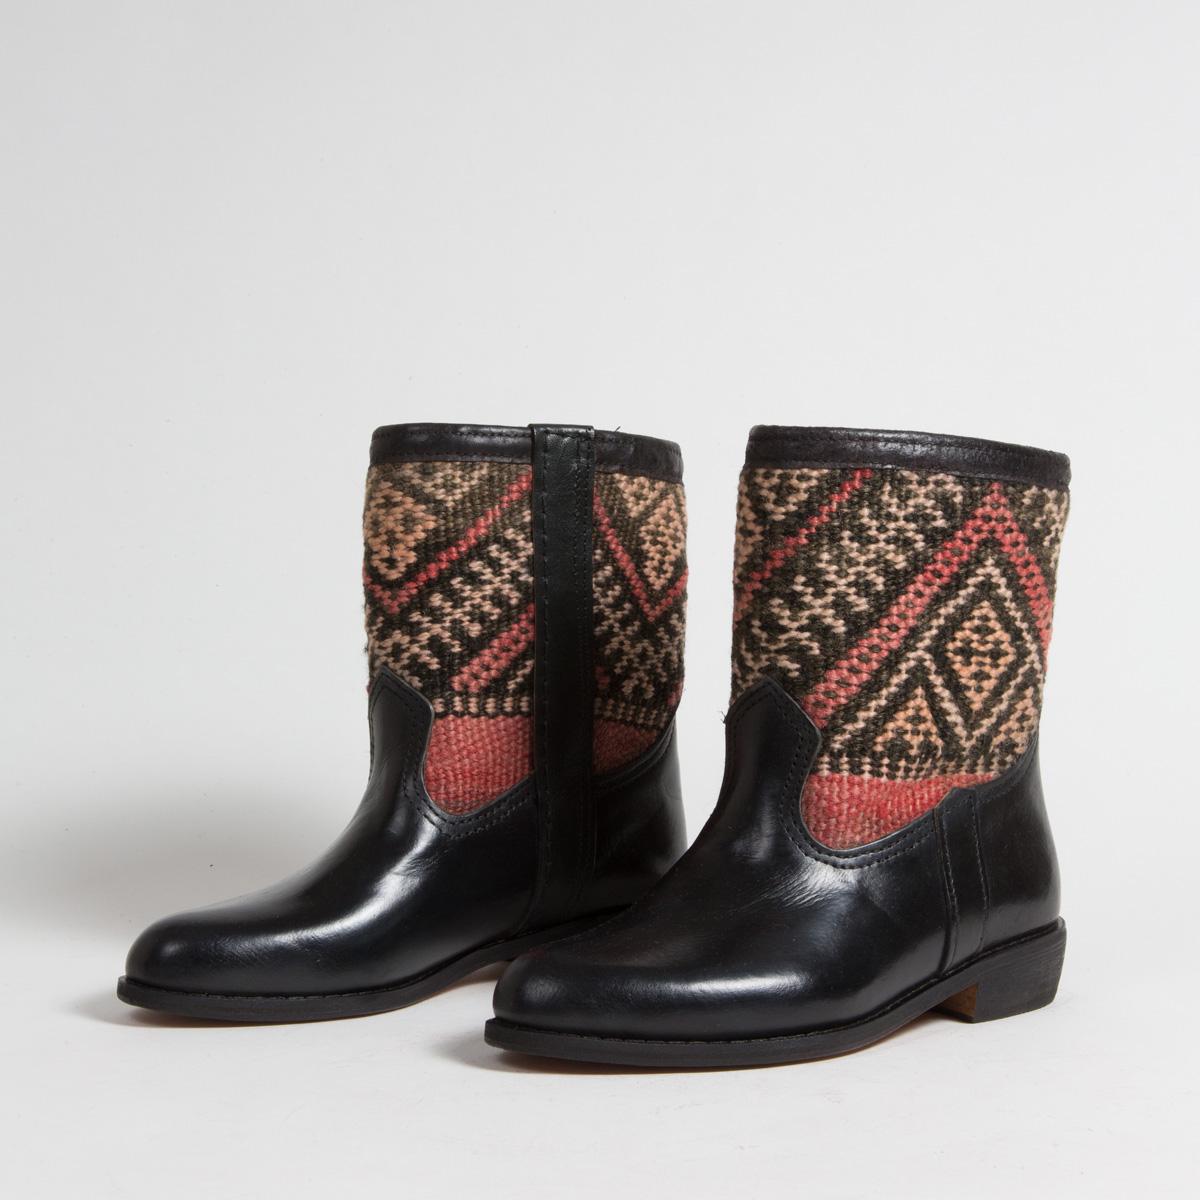 Bottines Kilim cuir mababouche artisanales (Réf. RPN5-37)